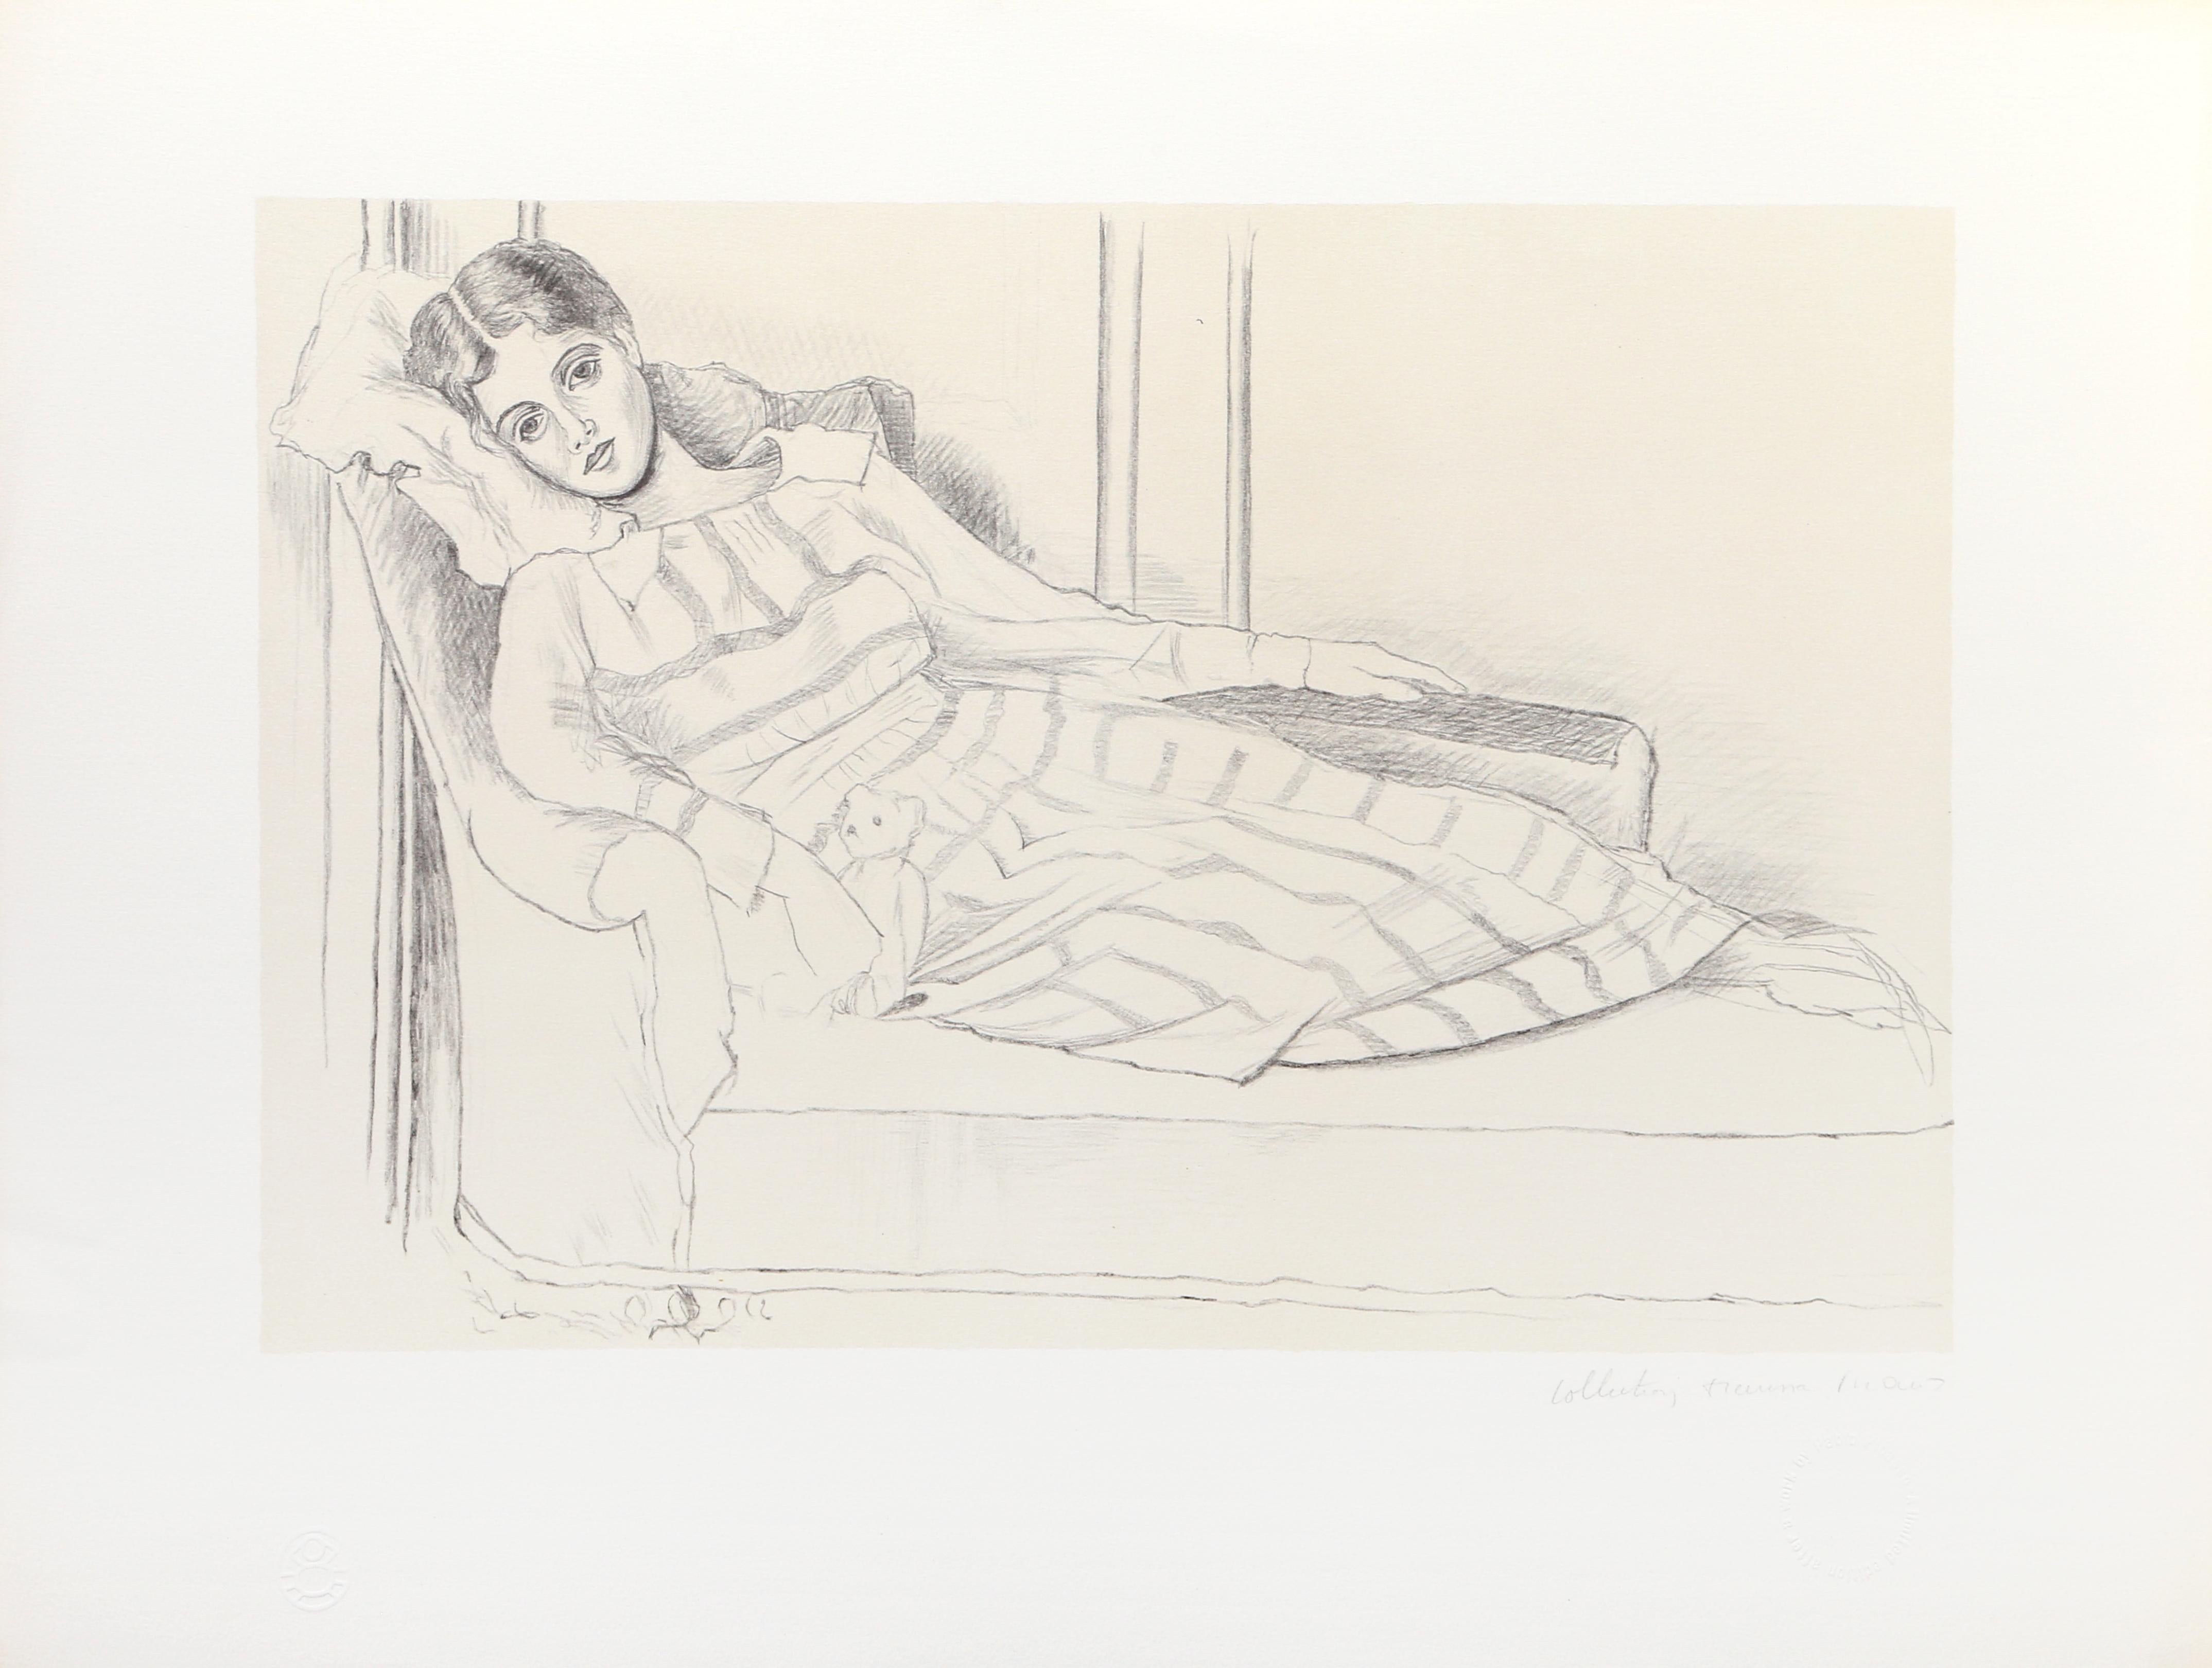 Pablo Picasso's print featuring his former wife and muse, Olga Picasso (Khokhlova/Kaklowa, is a great example of the artist's more naturalistic representations. Reclining on a chaise lounge, Olga's figure is represented in a naturalistic manner in